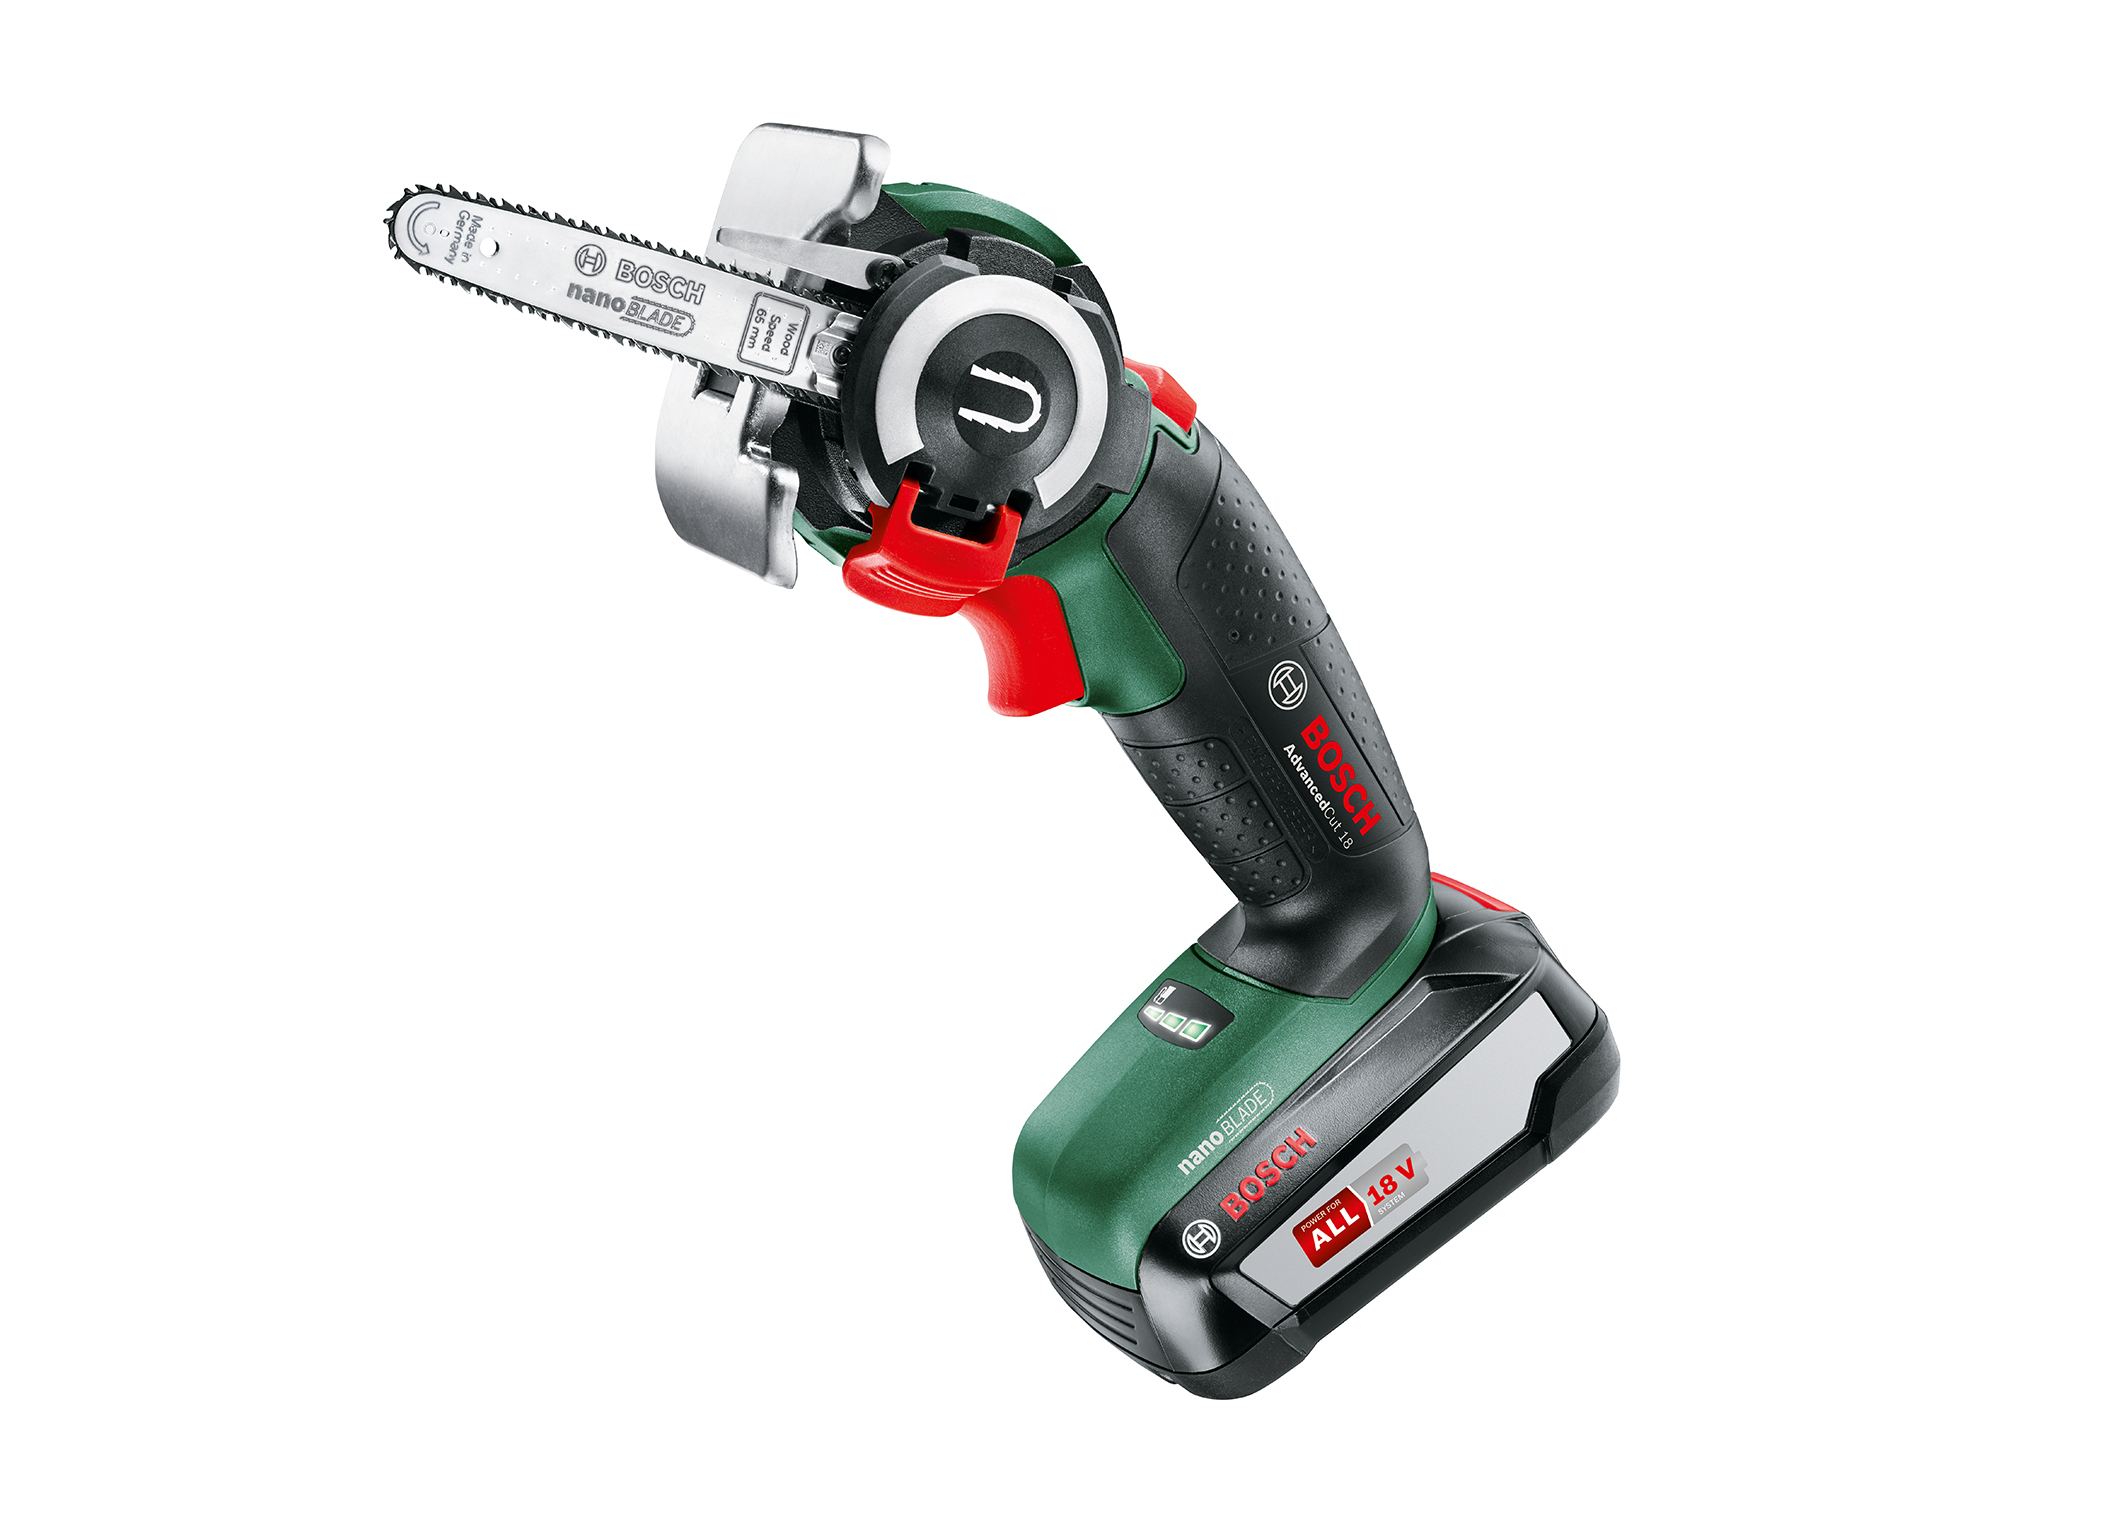 Vibration-free and precise sawing thanks to “NanoBlade”: AdvancedCut 18 from Bosch for do-it-yourselfers